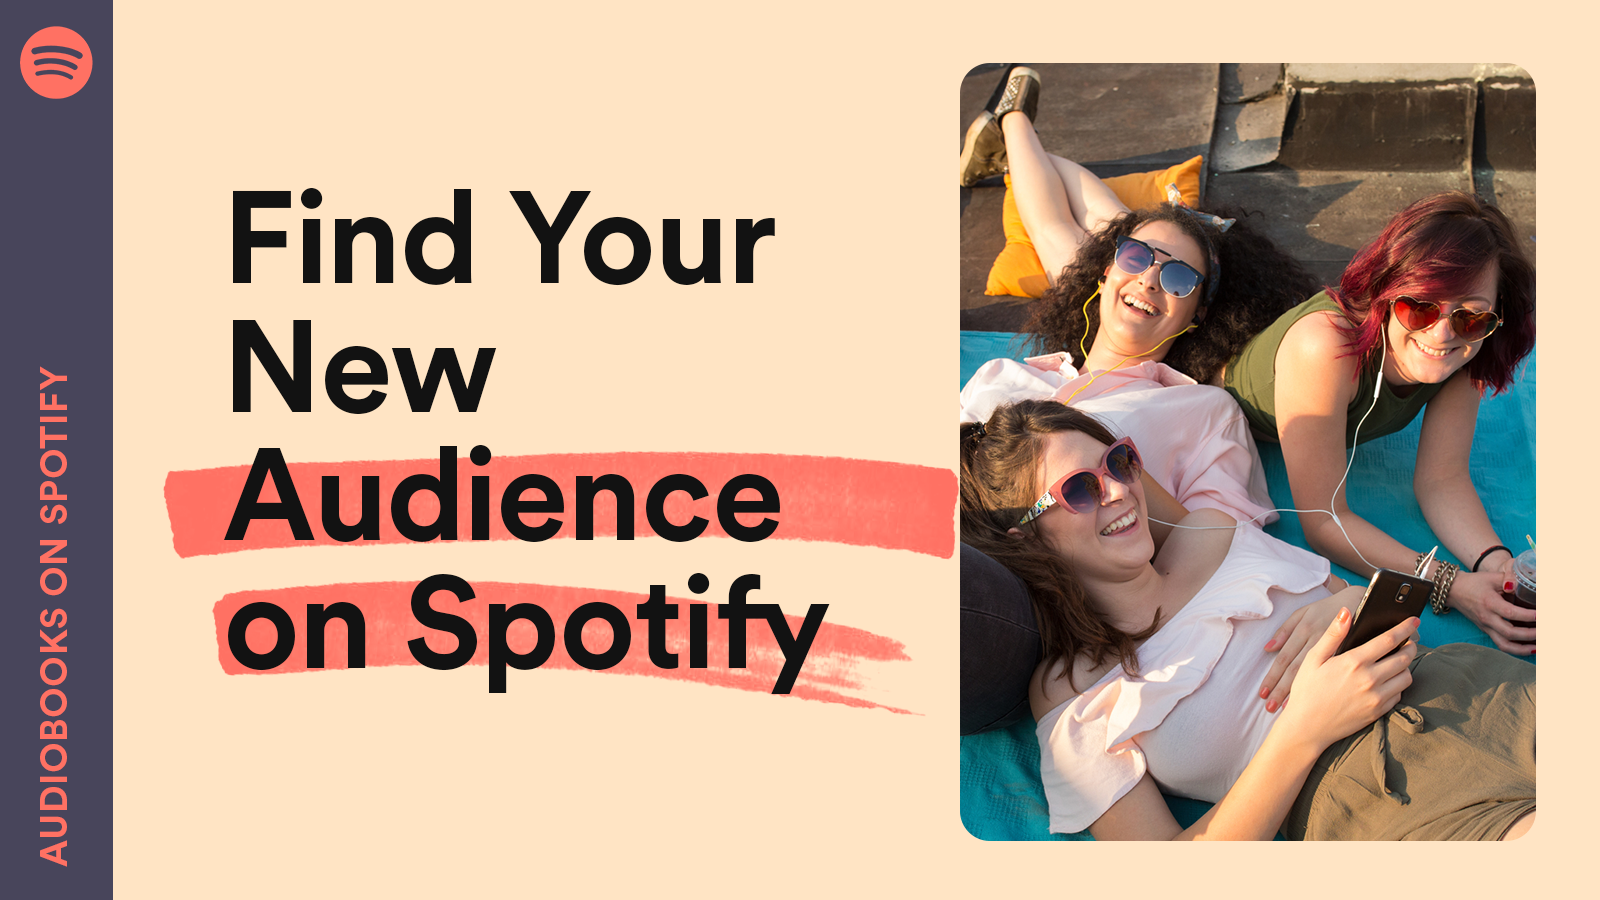 Authors Can Reach Millions of New Listeners on Spotify